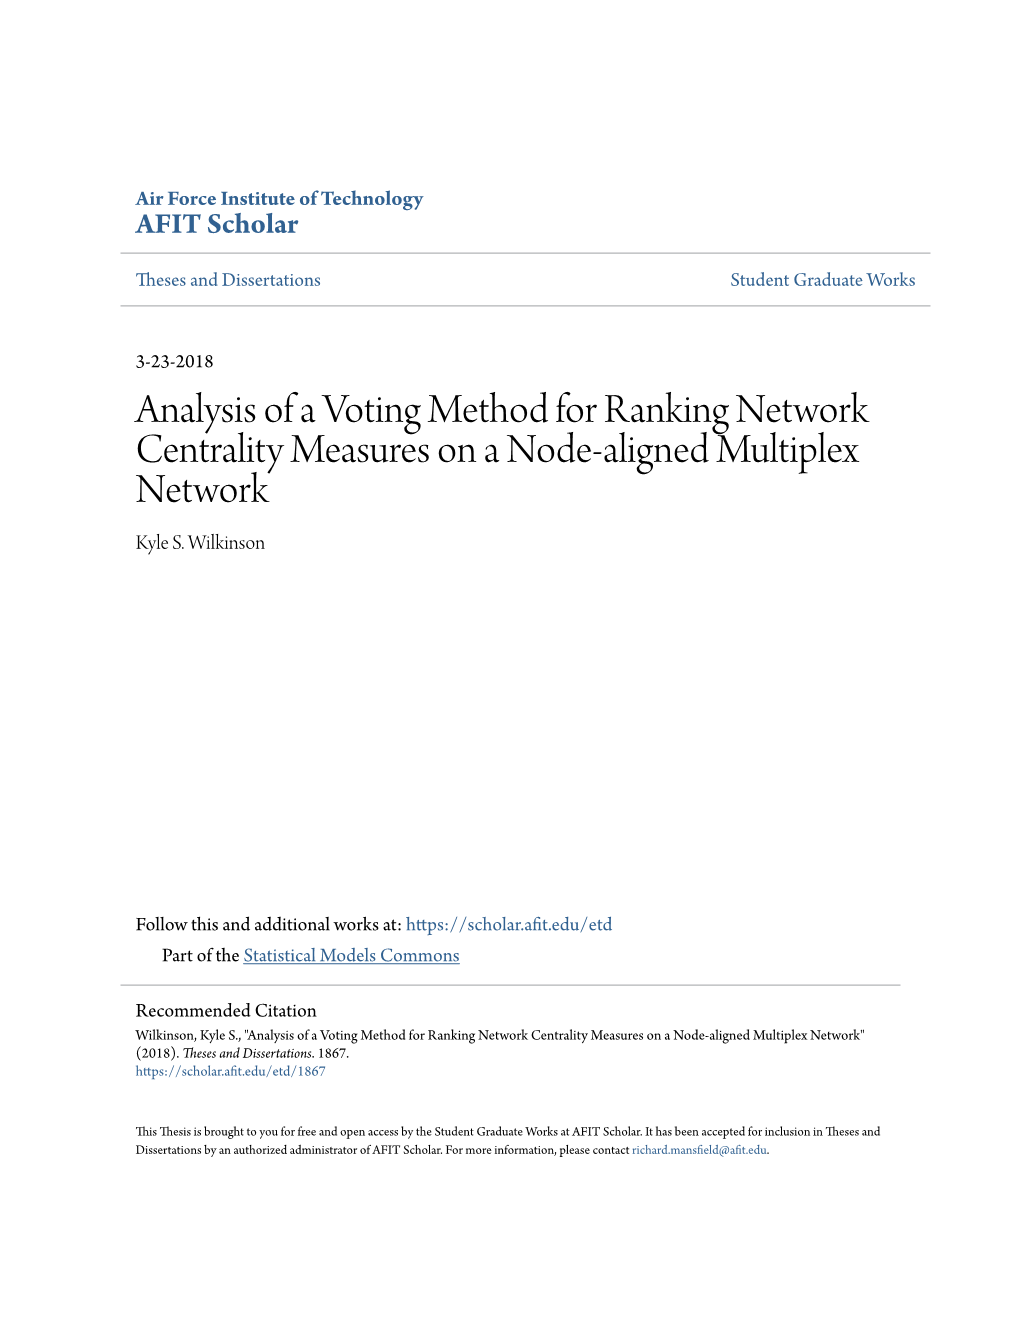 Analysis of a Voting Method for Ranking Network Centrality Measures on a Node-Aligned Multiplex Network Kyle S